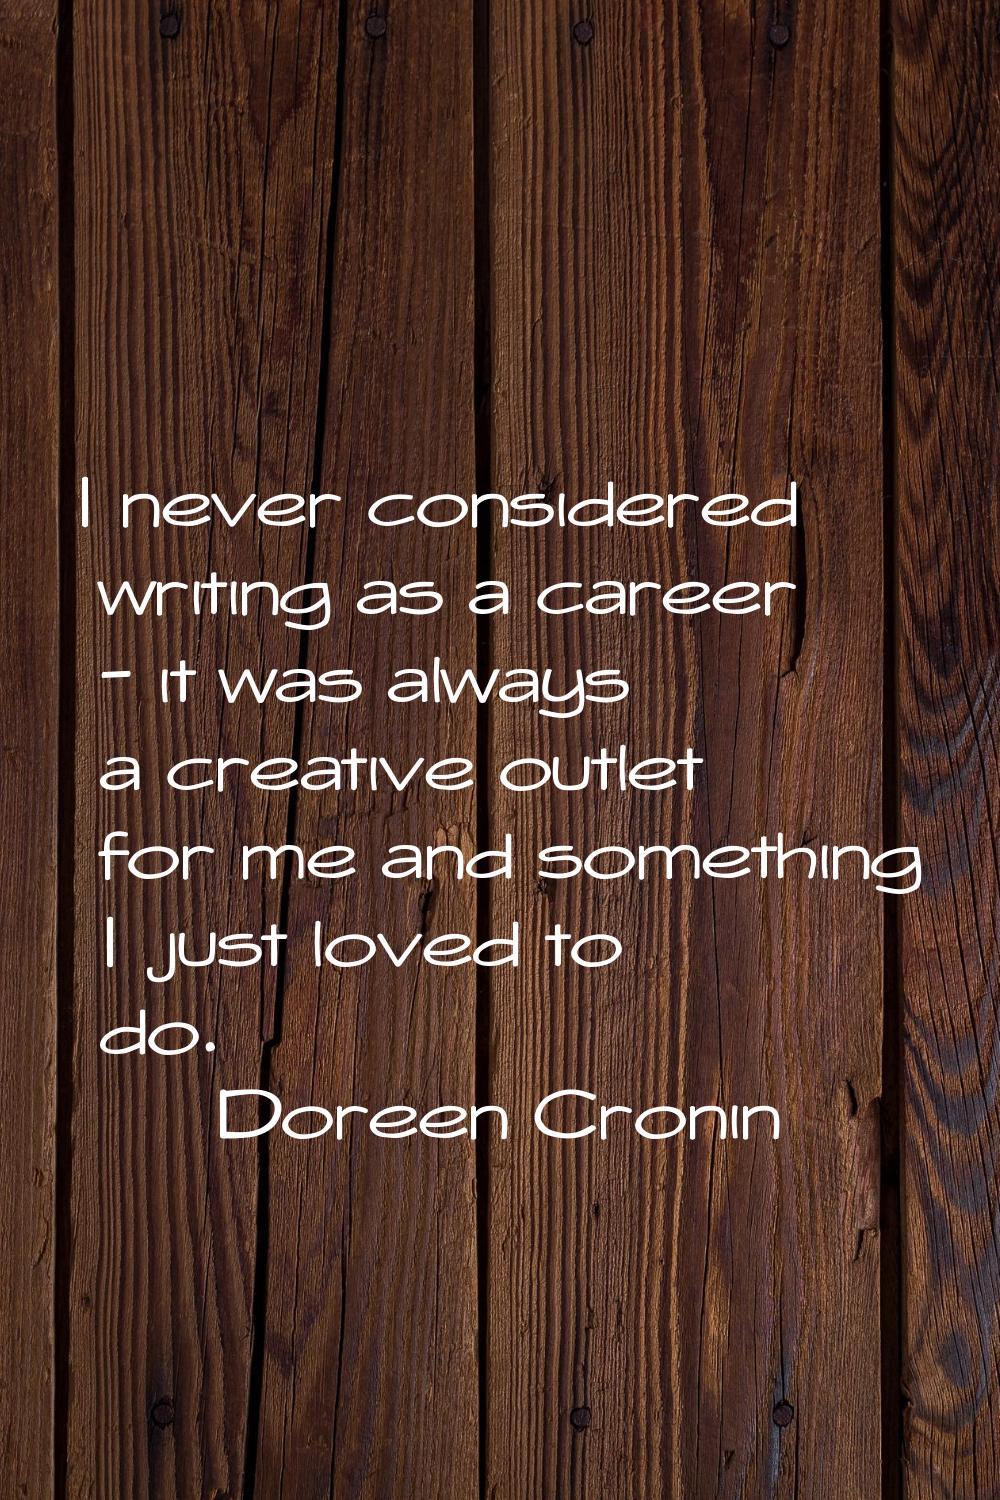 I never considered writing as a career - it was always a creative outlet for me and something I jus